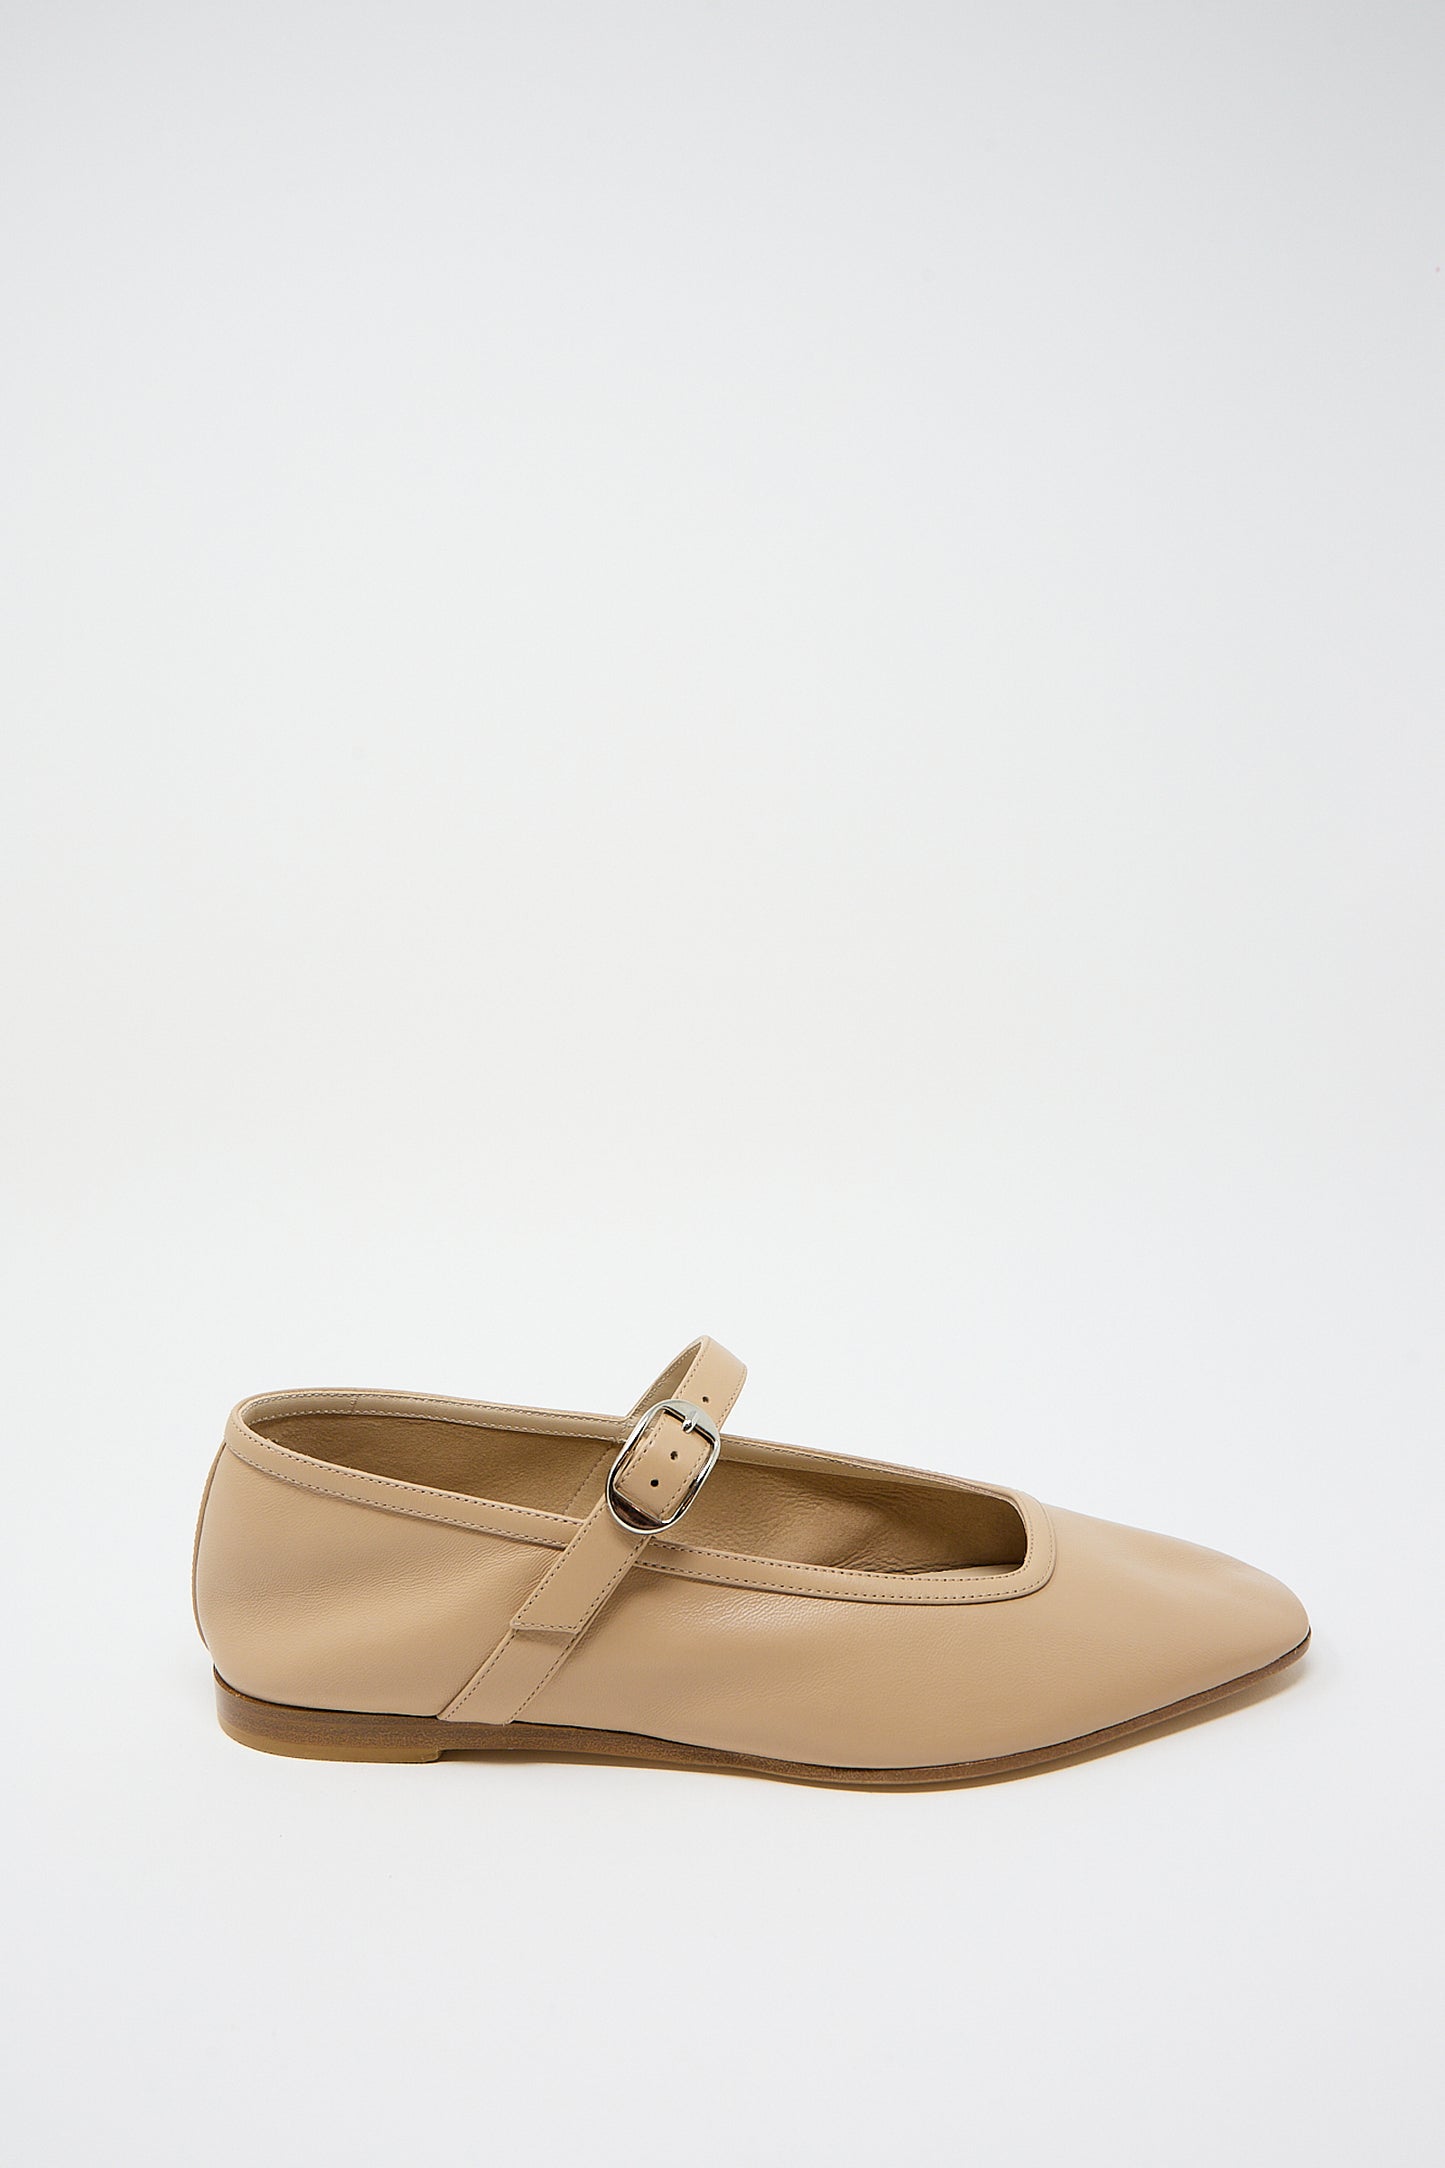 Fawn leather ballet Mary Jane flat with a buckle strap and leather piping on a white background by Le Monde Beryl.